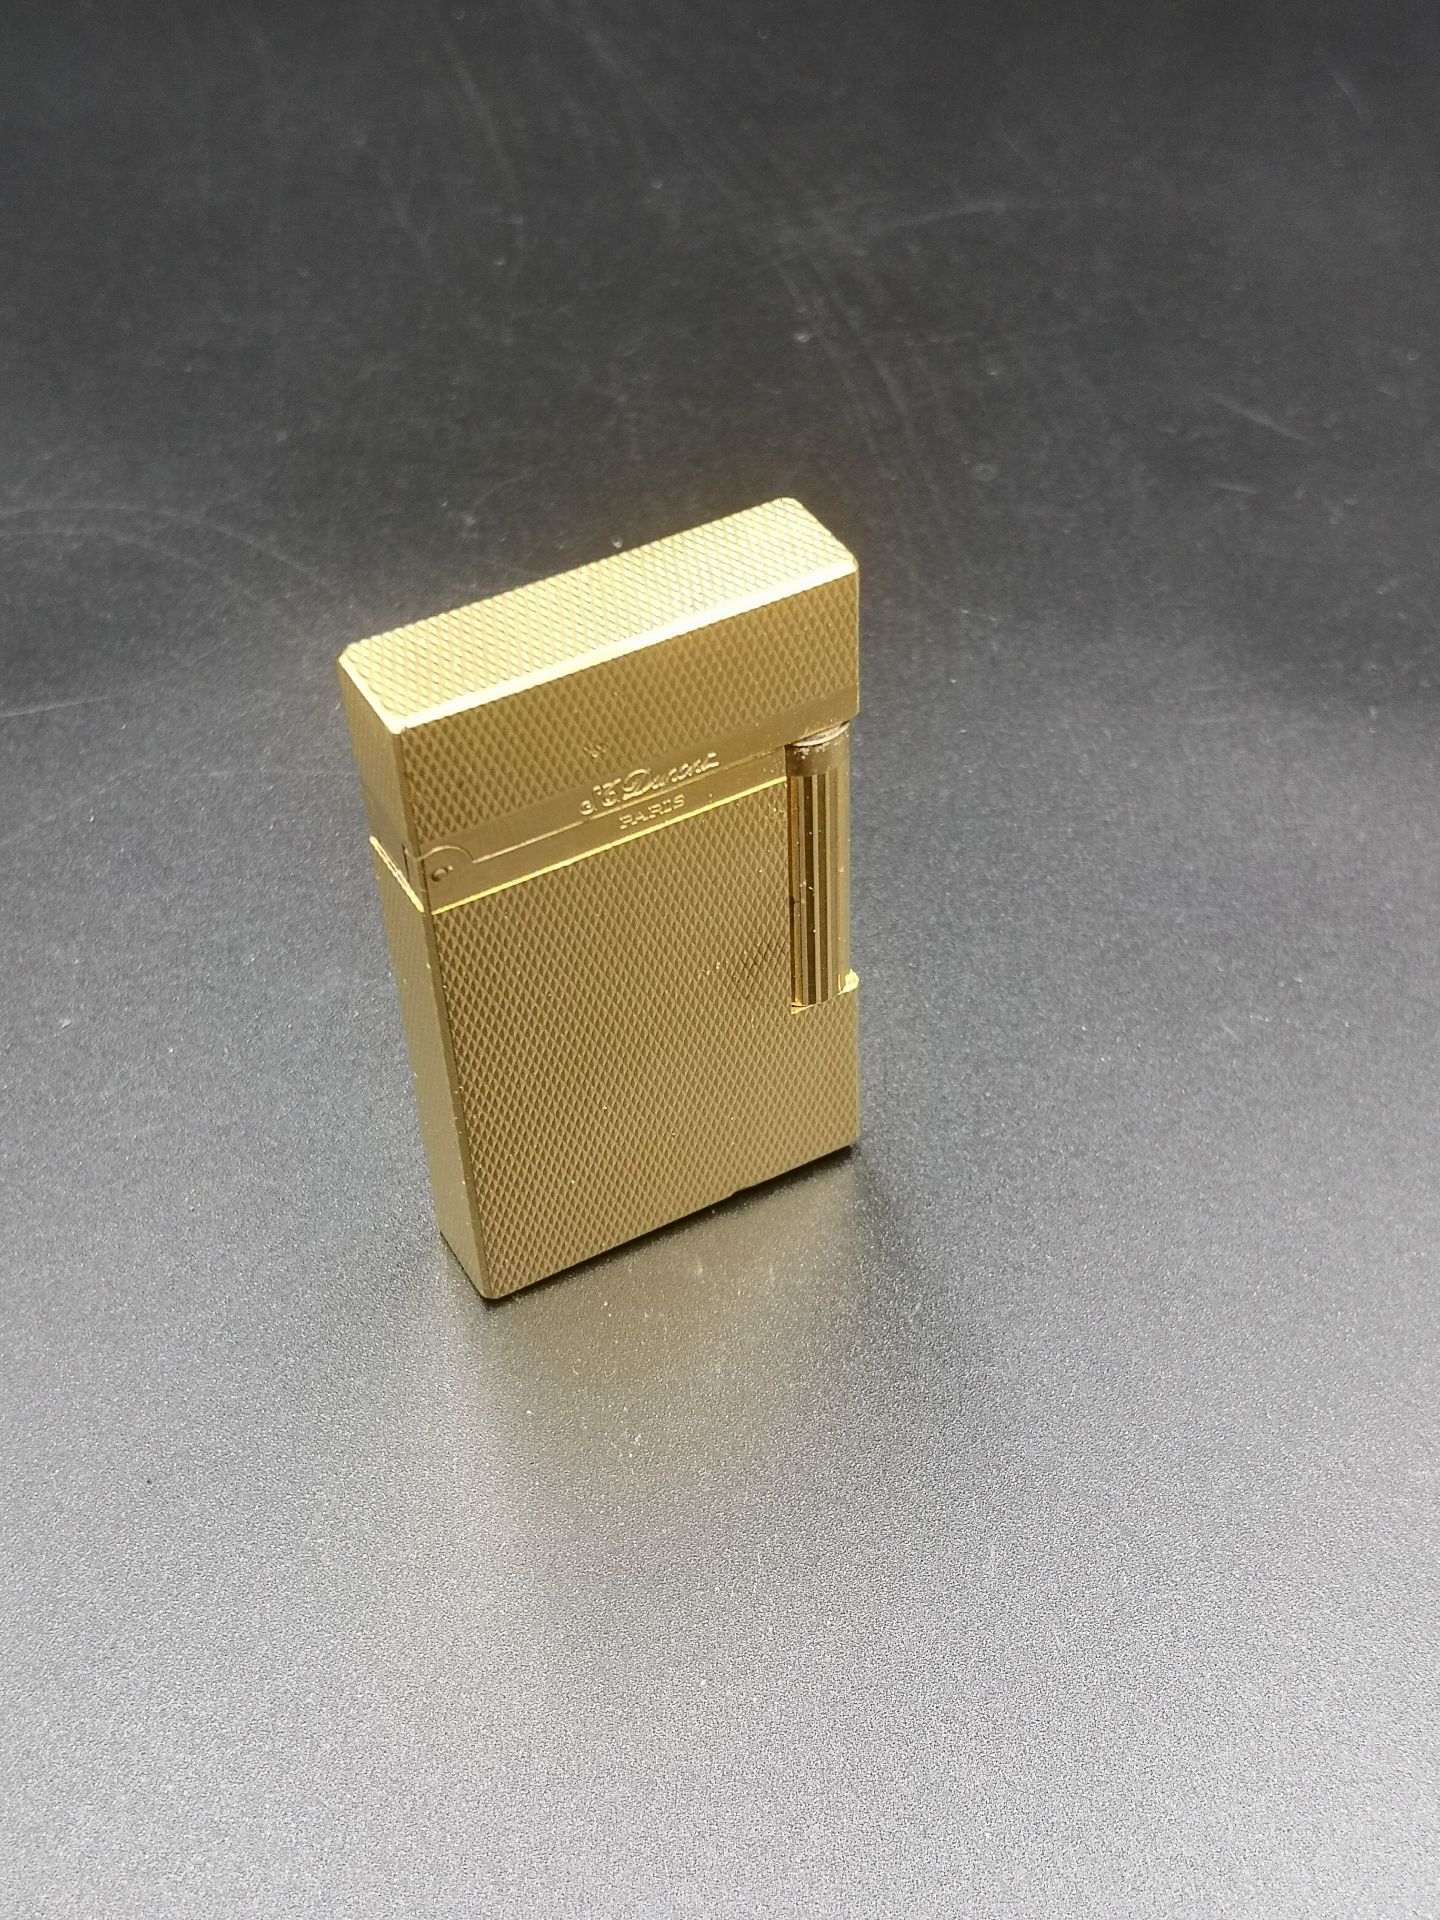 Three gold plated Dupont lighters - Image 7 of 8